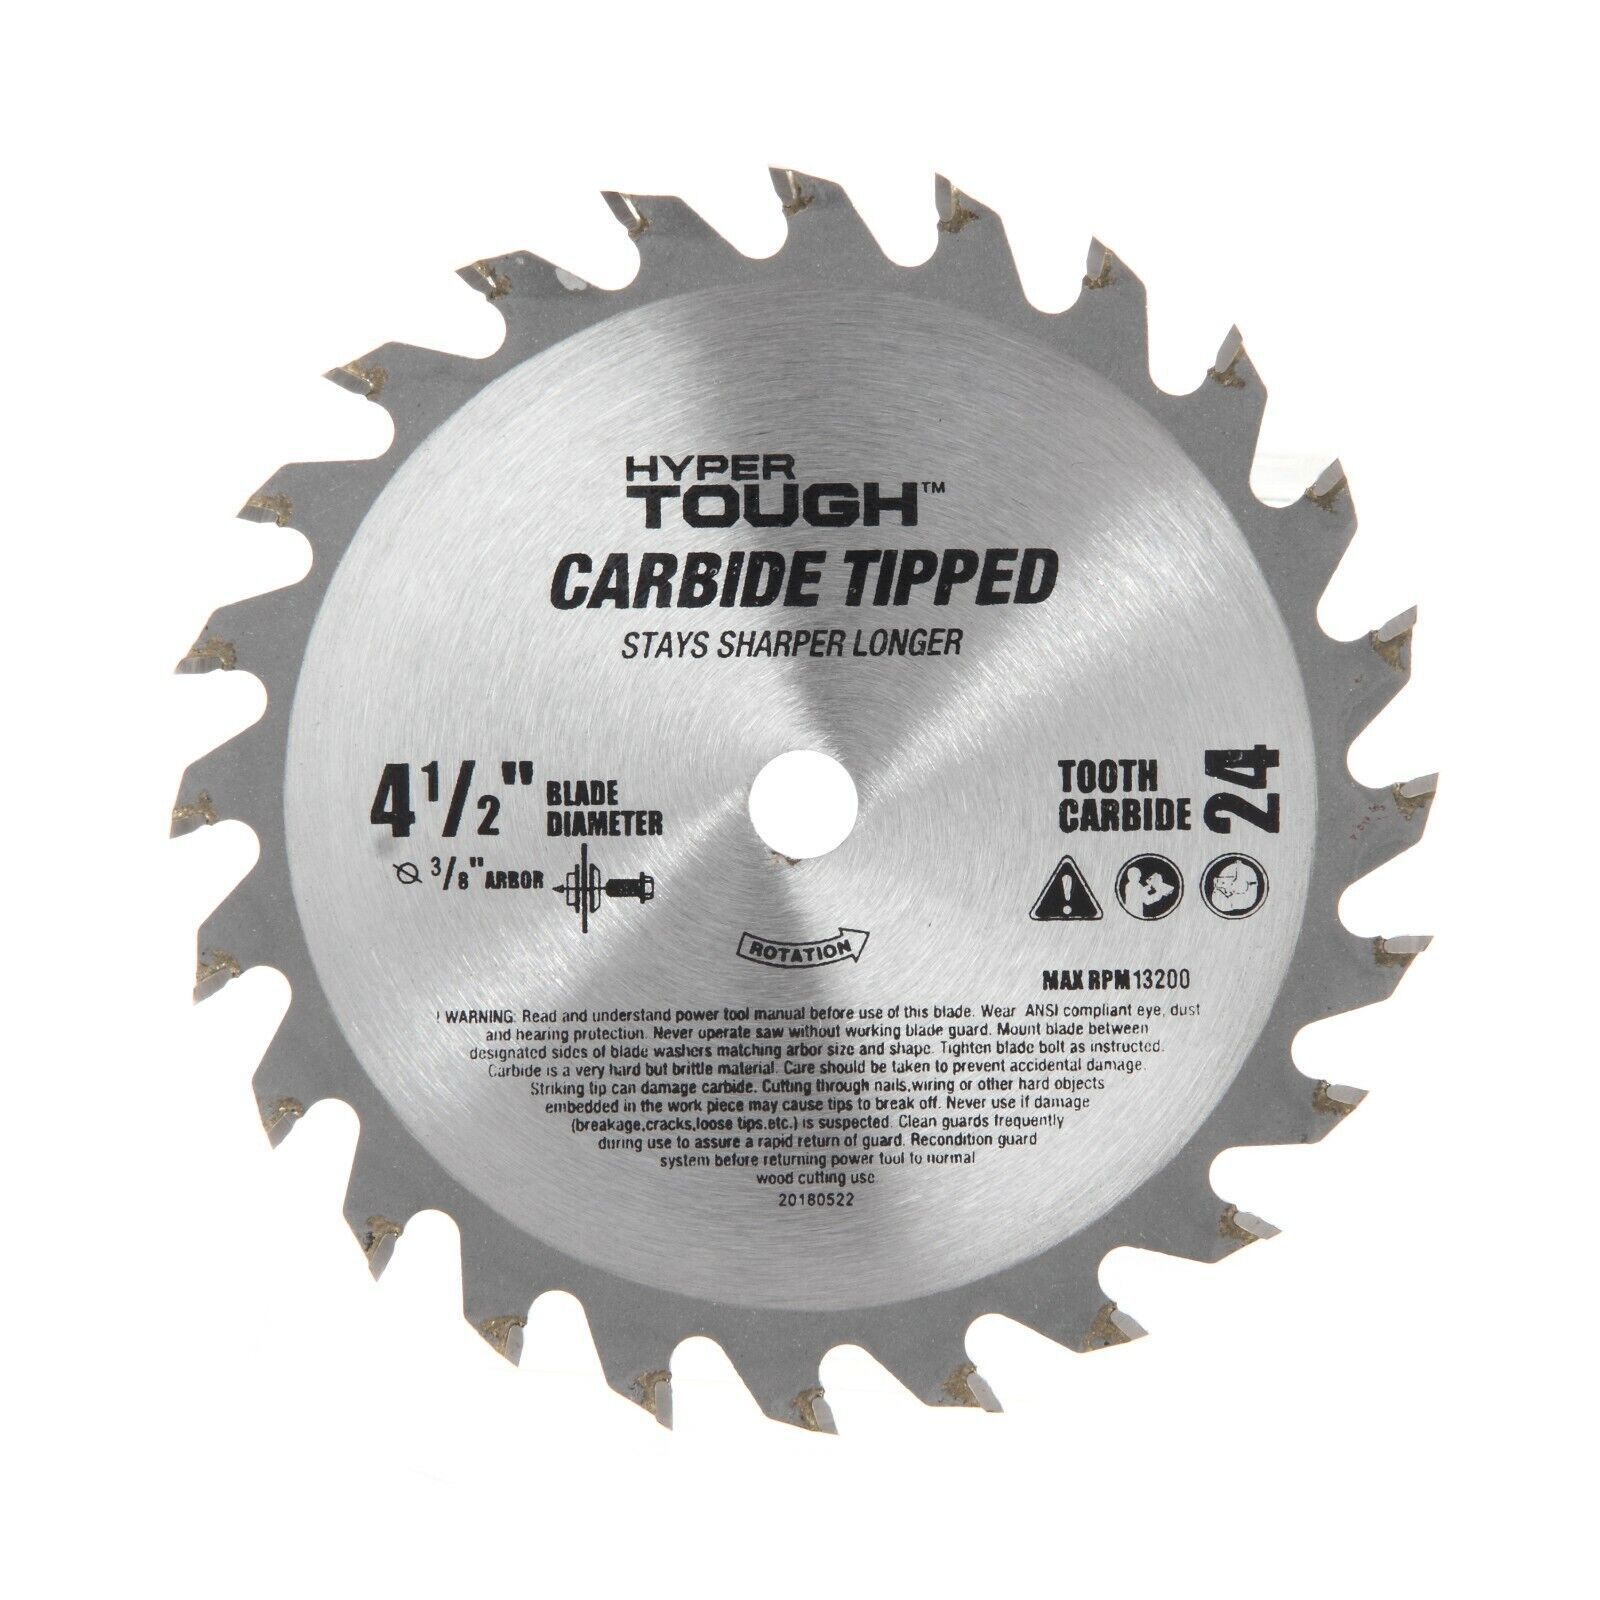 Two 24T 4.5" Carbide Circular Saw Blade For Rockwell Rk3441K, Wx429L 3/8" Arbor - $25.99